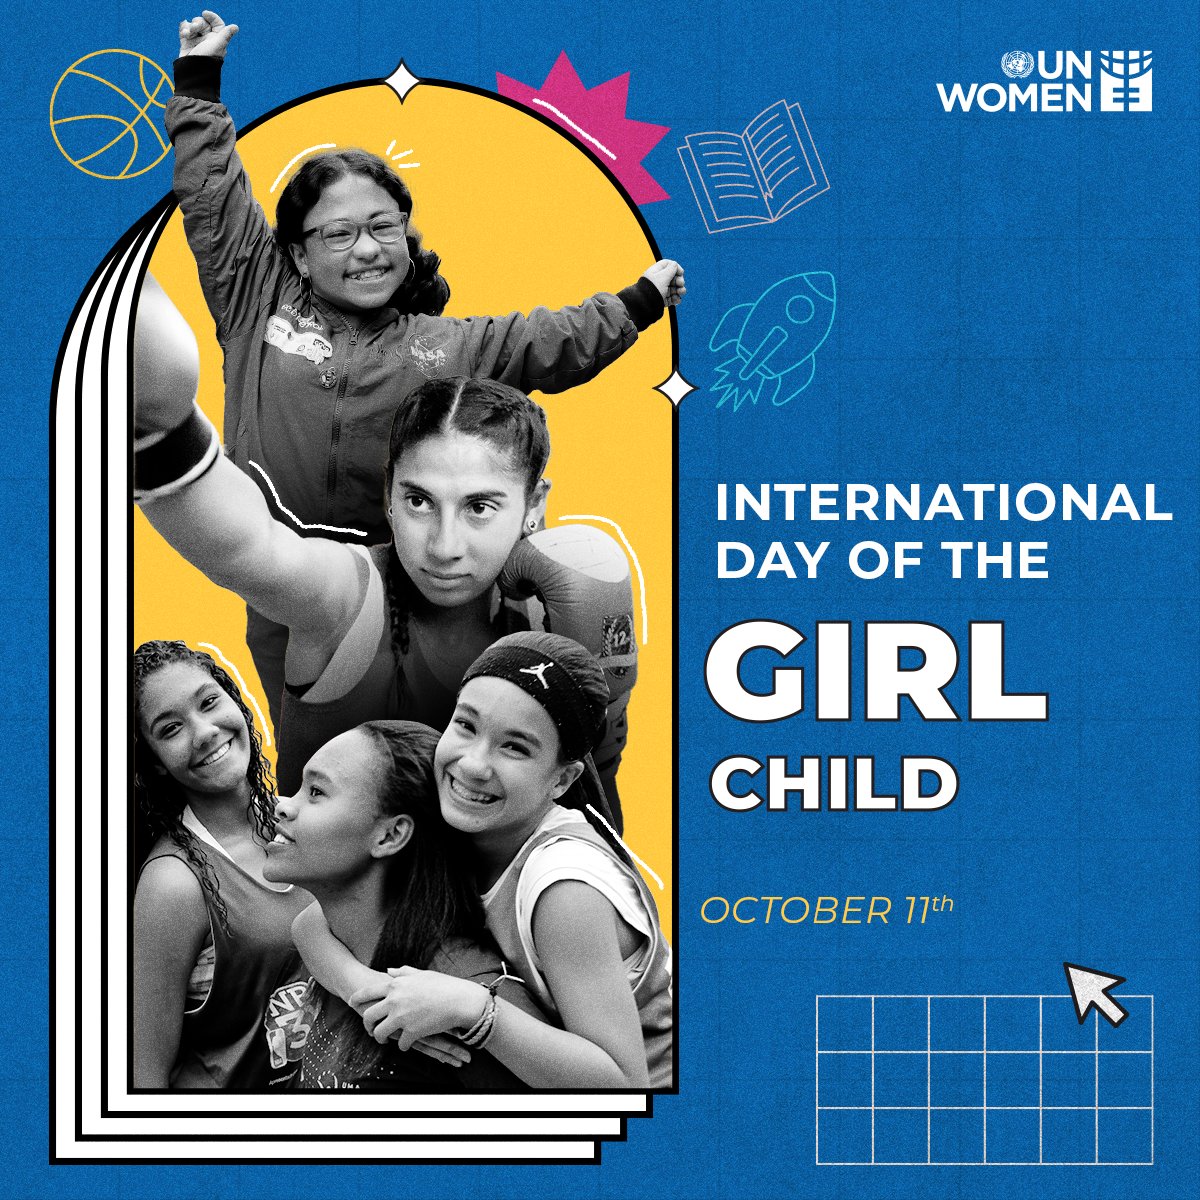 Happy #DayofTheGirl! Today and every day, we encourage and celebrate girls’ influence on global agendas on: ✔️Climate ✔️Education ✔️Mental wellbeing ✔️Gender-based violence ✔️Sexual and reproductive health and rights. Girls are moving forward and we applaud them all 👏